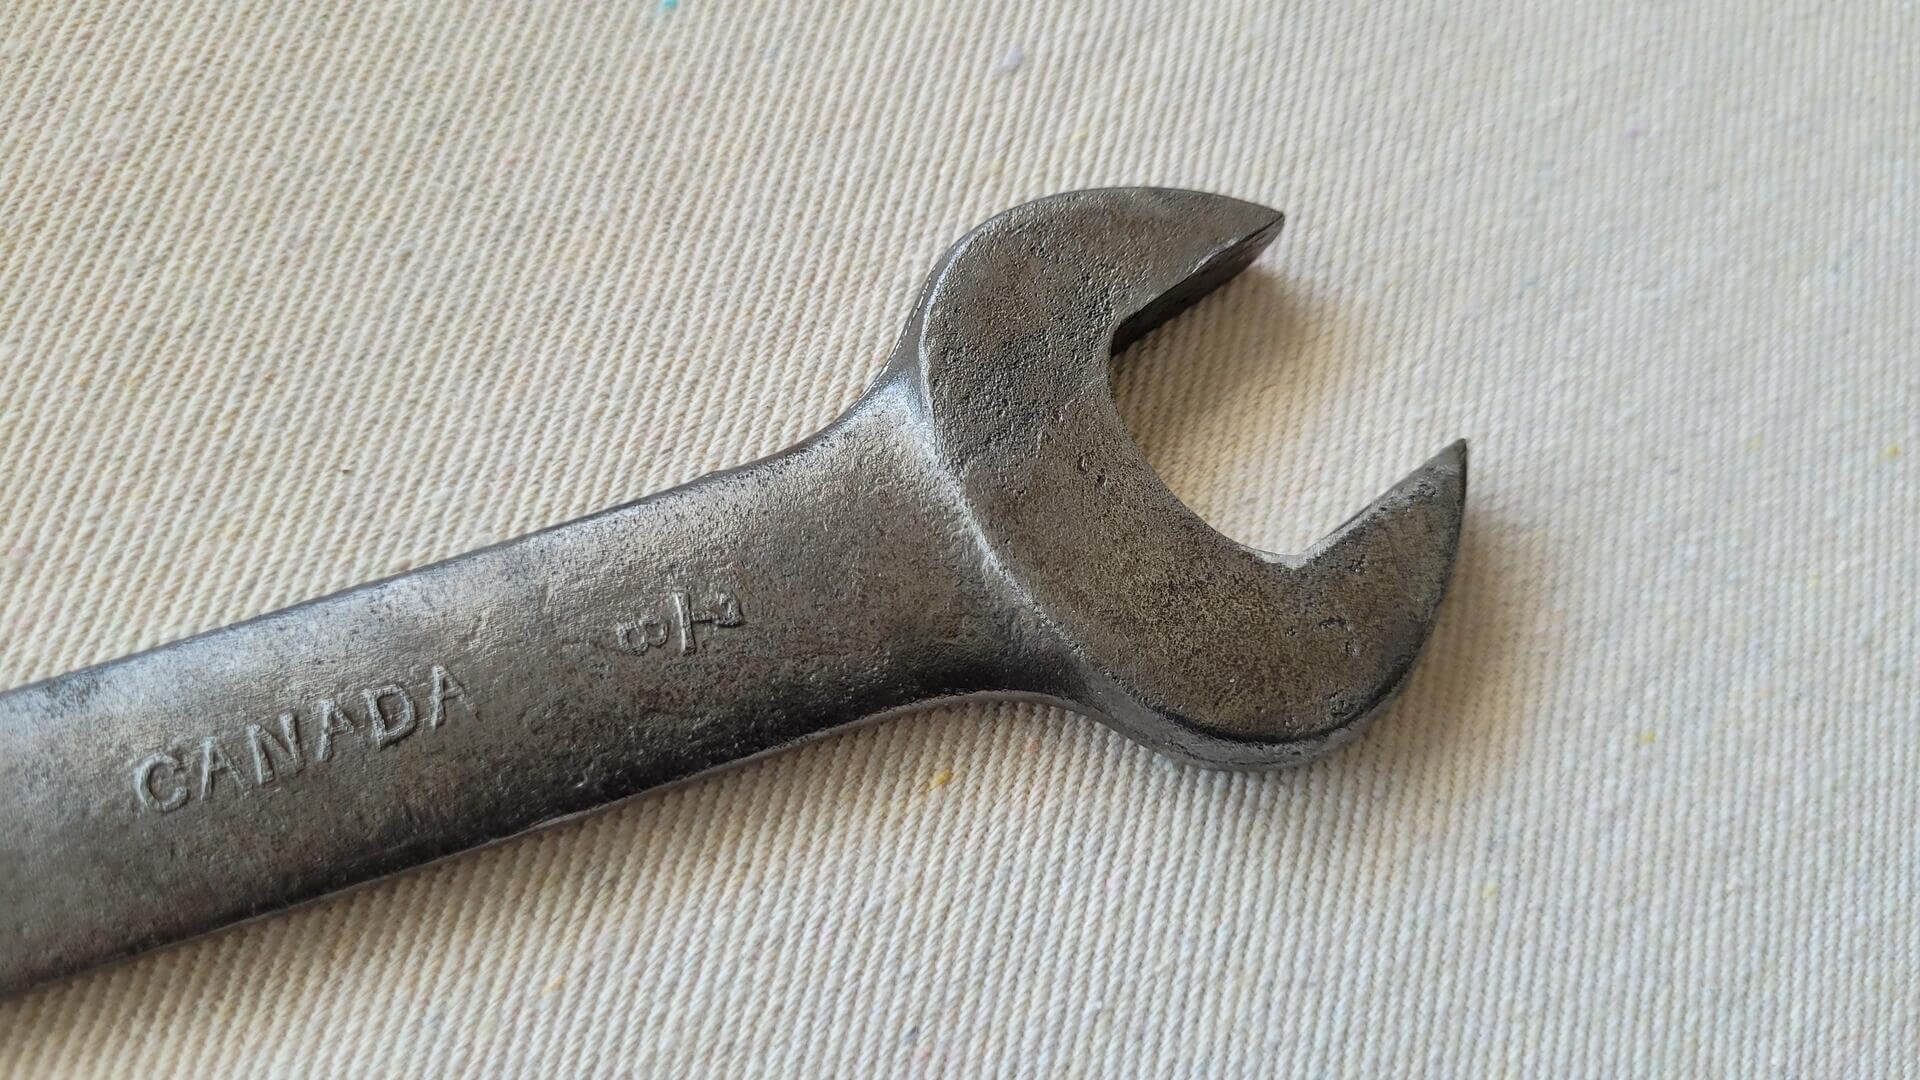 Rare antique open end wrench spanner 25/32" x 7/8" by ETF Engineering Tools & Forging from St. Catharines Ontario. Vintage made in Canada collectible automotive and mechanic hand tools